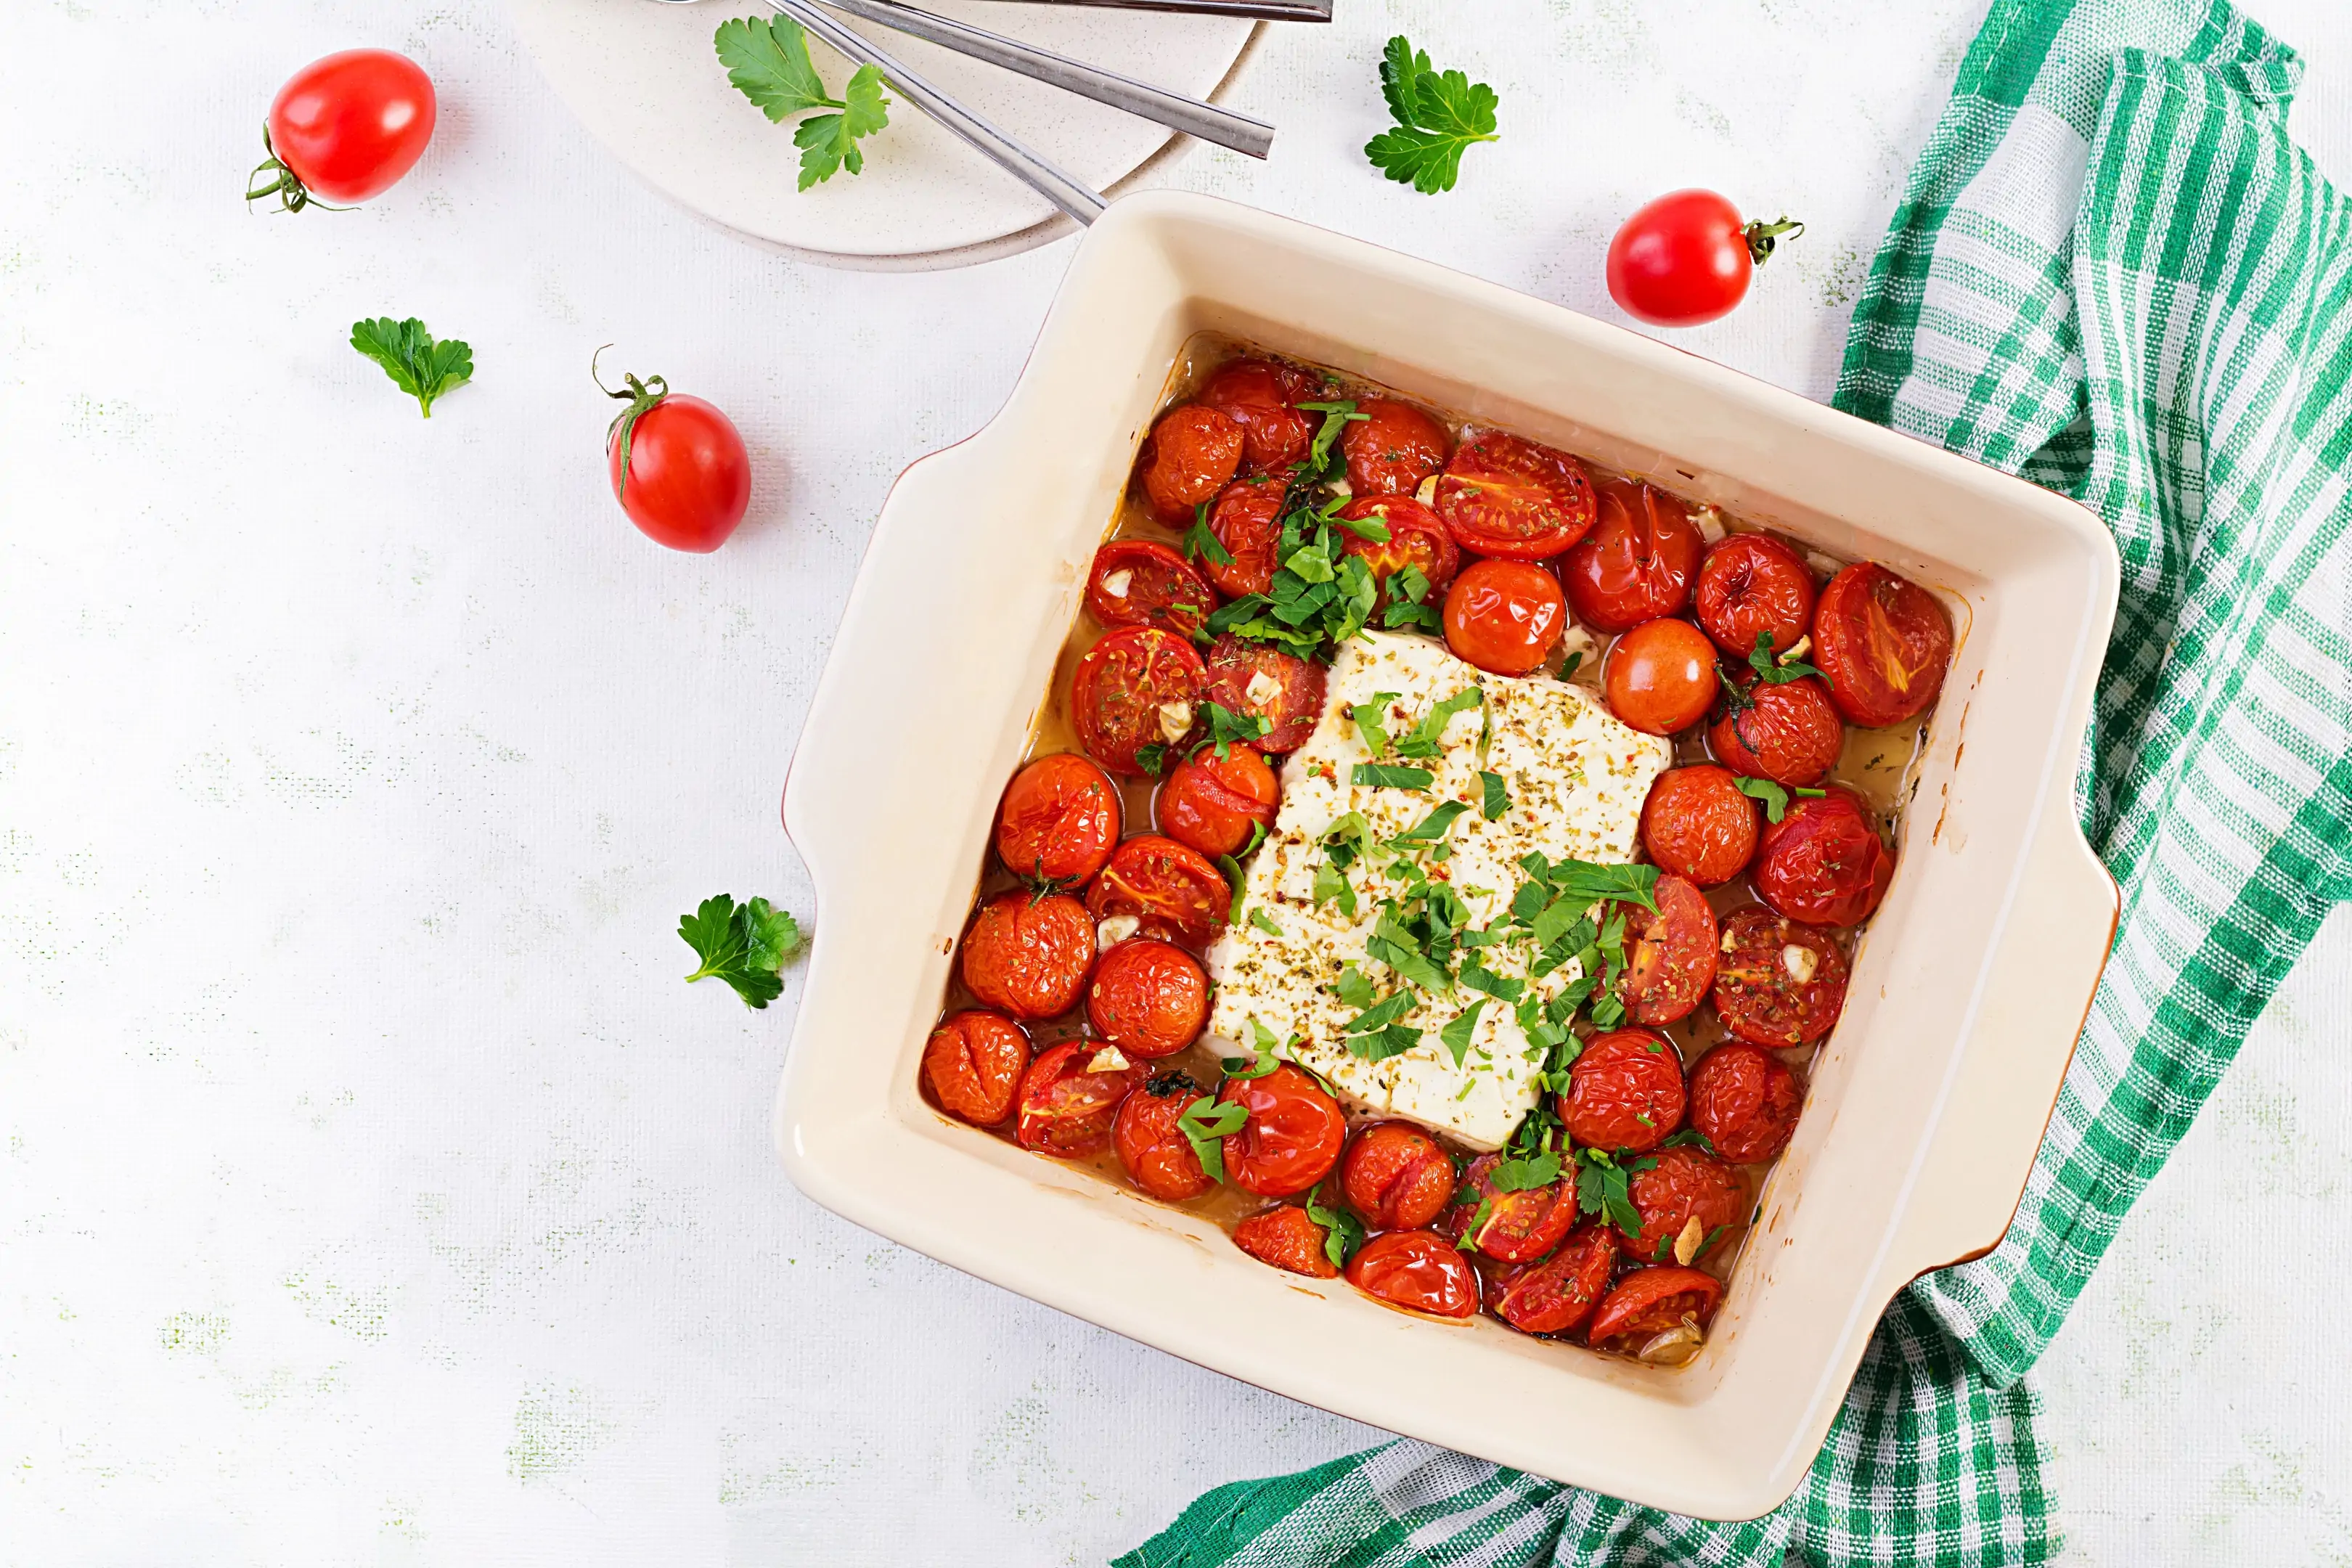 Baked cherry tomatoes, feta cheese, garlic, herbs and olive oil